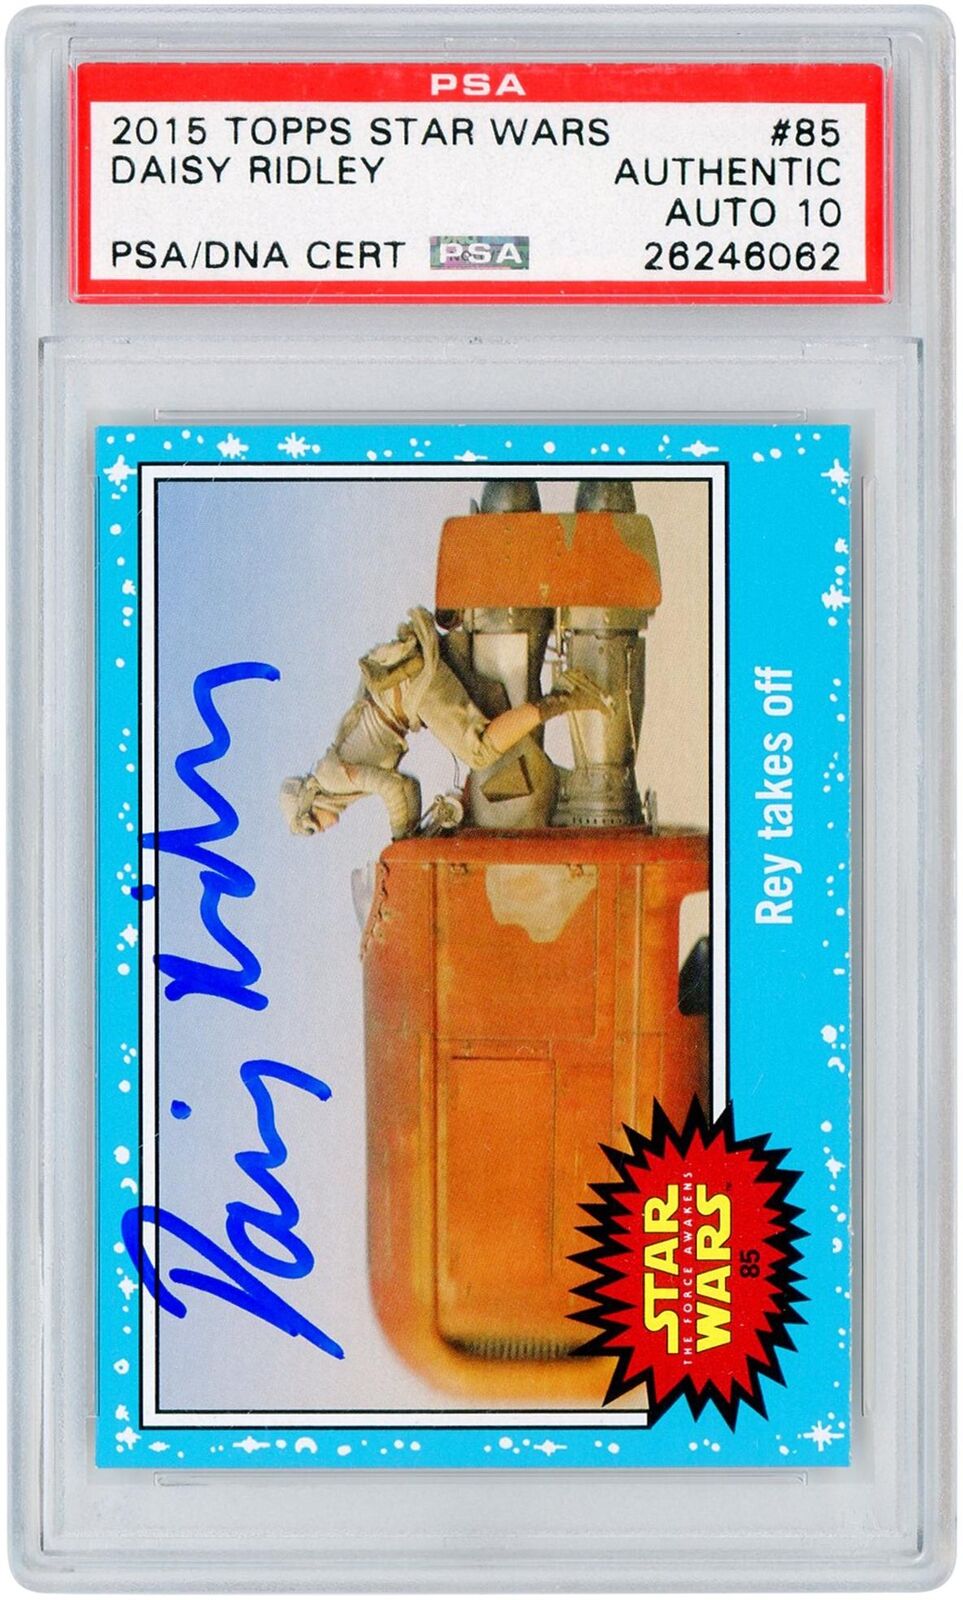 Daisy Ridley Star Wars Autographed 2015 Topps #85 Psa Authenticated Card